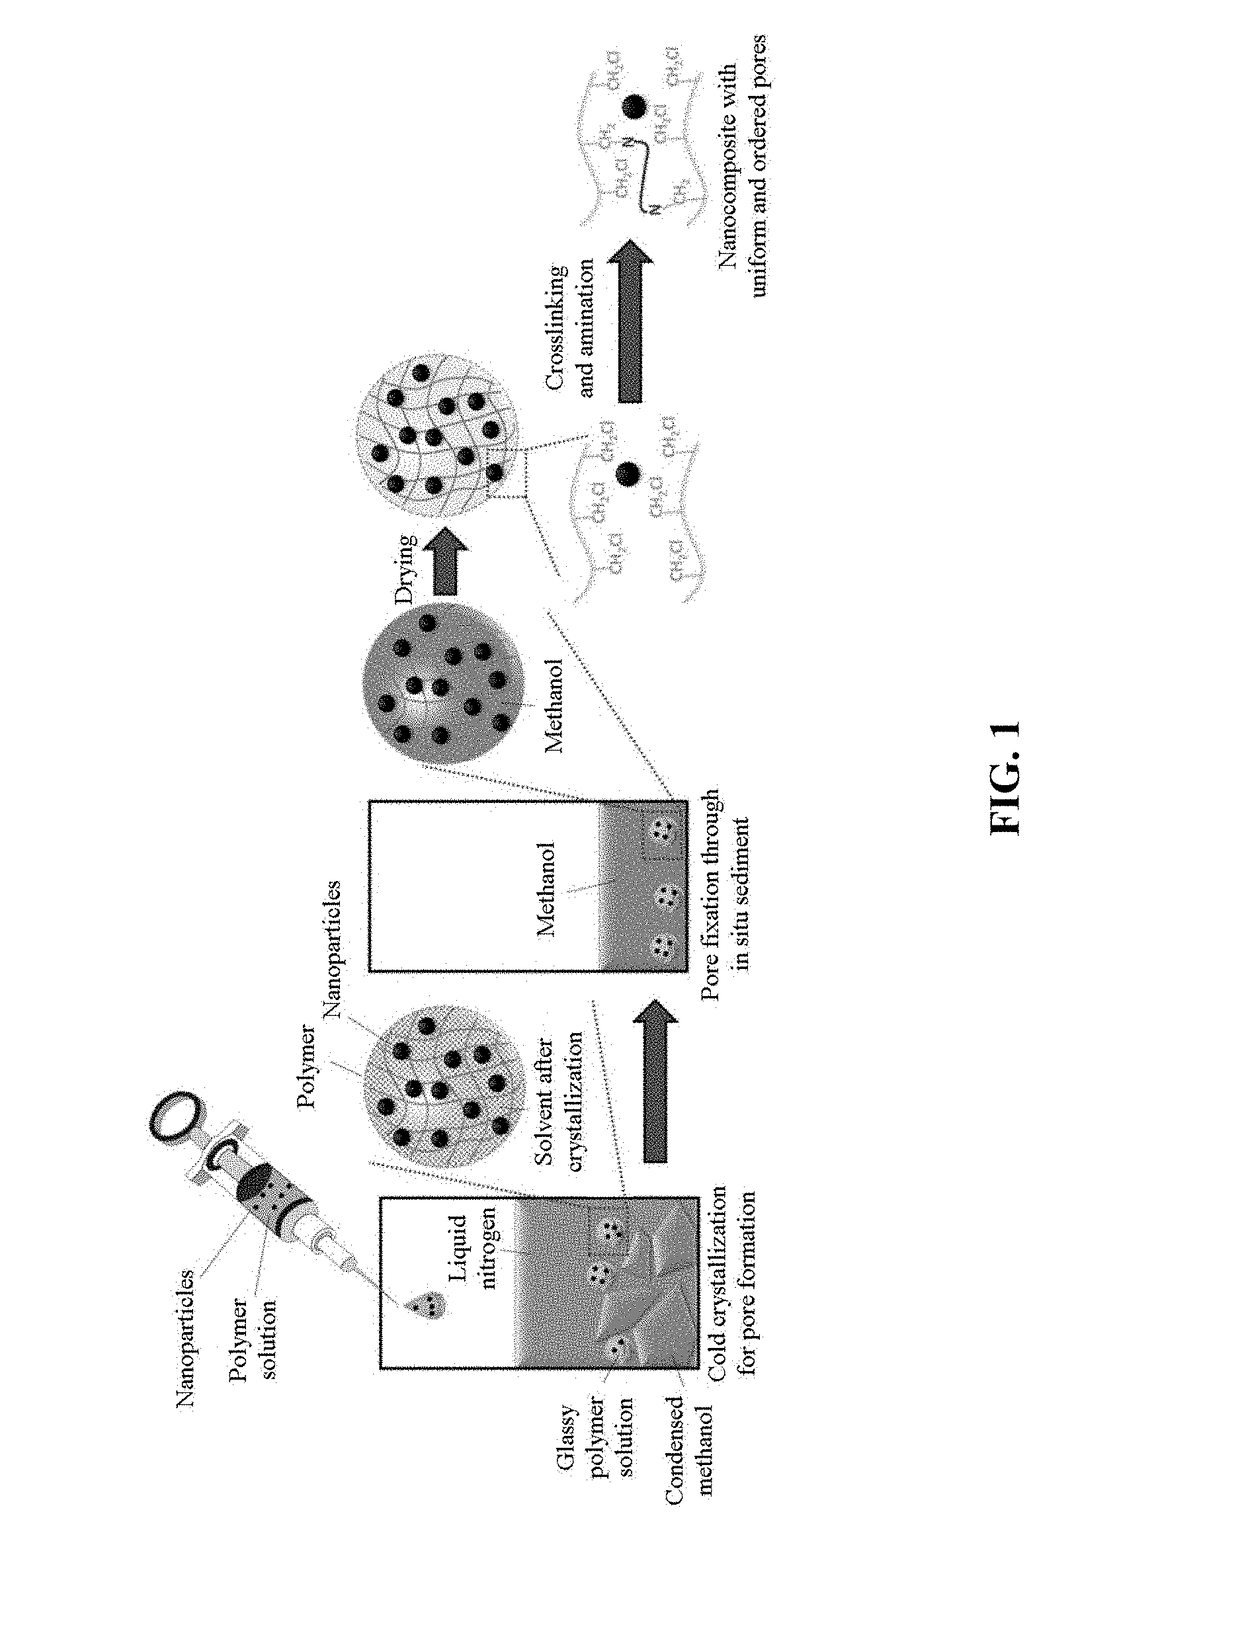 Resin nanocomposite, method for preparing the same, and method for treating sewage with the same